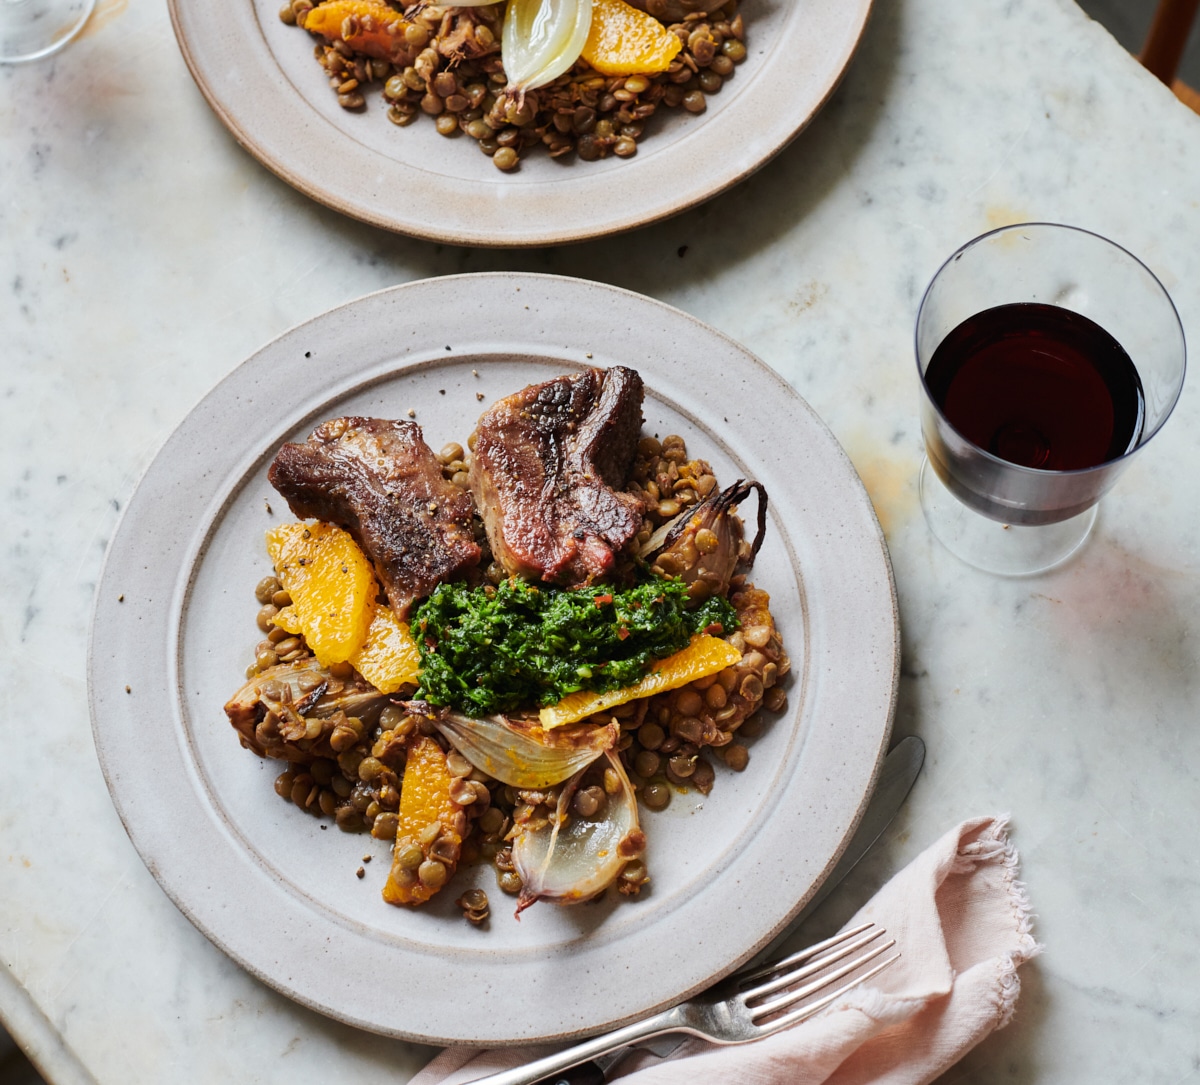 Ox tongue with orange lentils made from Borough Market ingredients